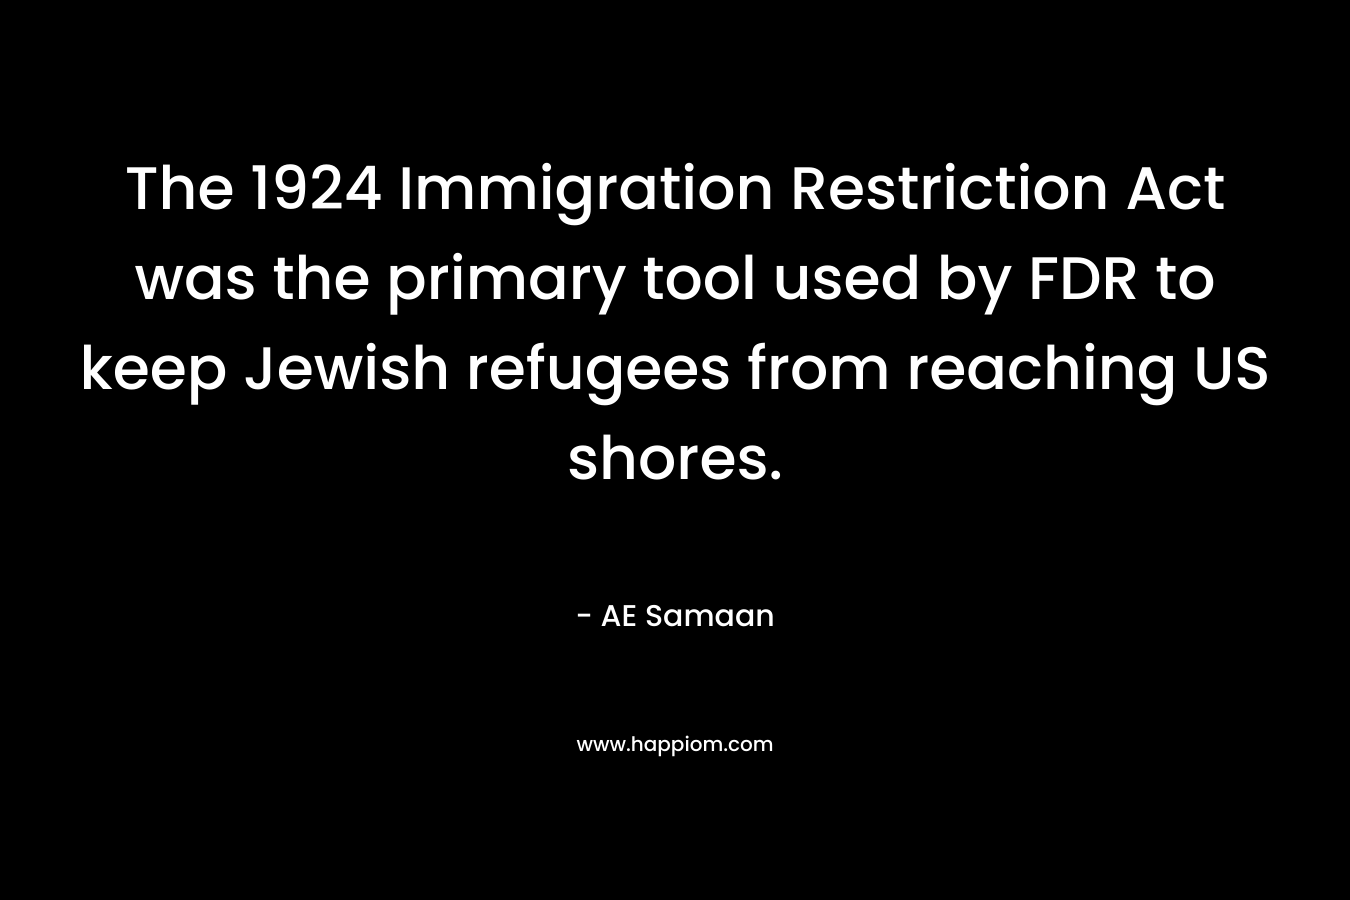 The 1924 Immigration Restriction Act was the primary tool used by FDR to keep Jewish refugees from reaching US shores. – AE Samaan